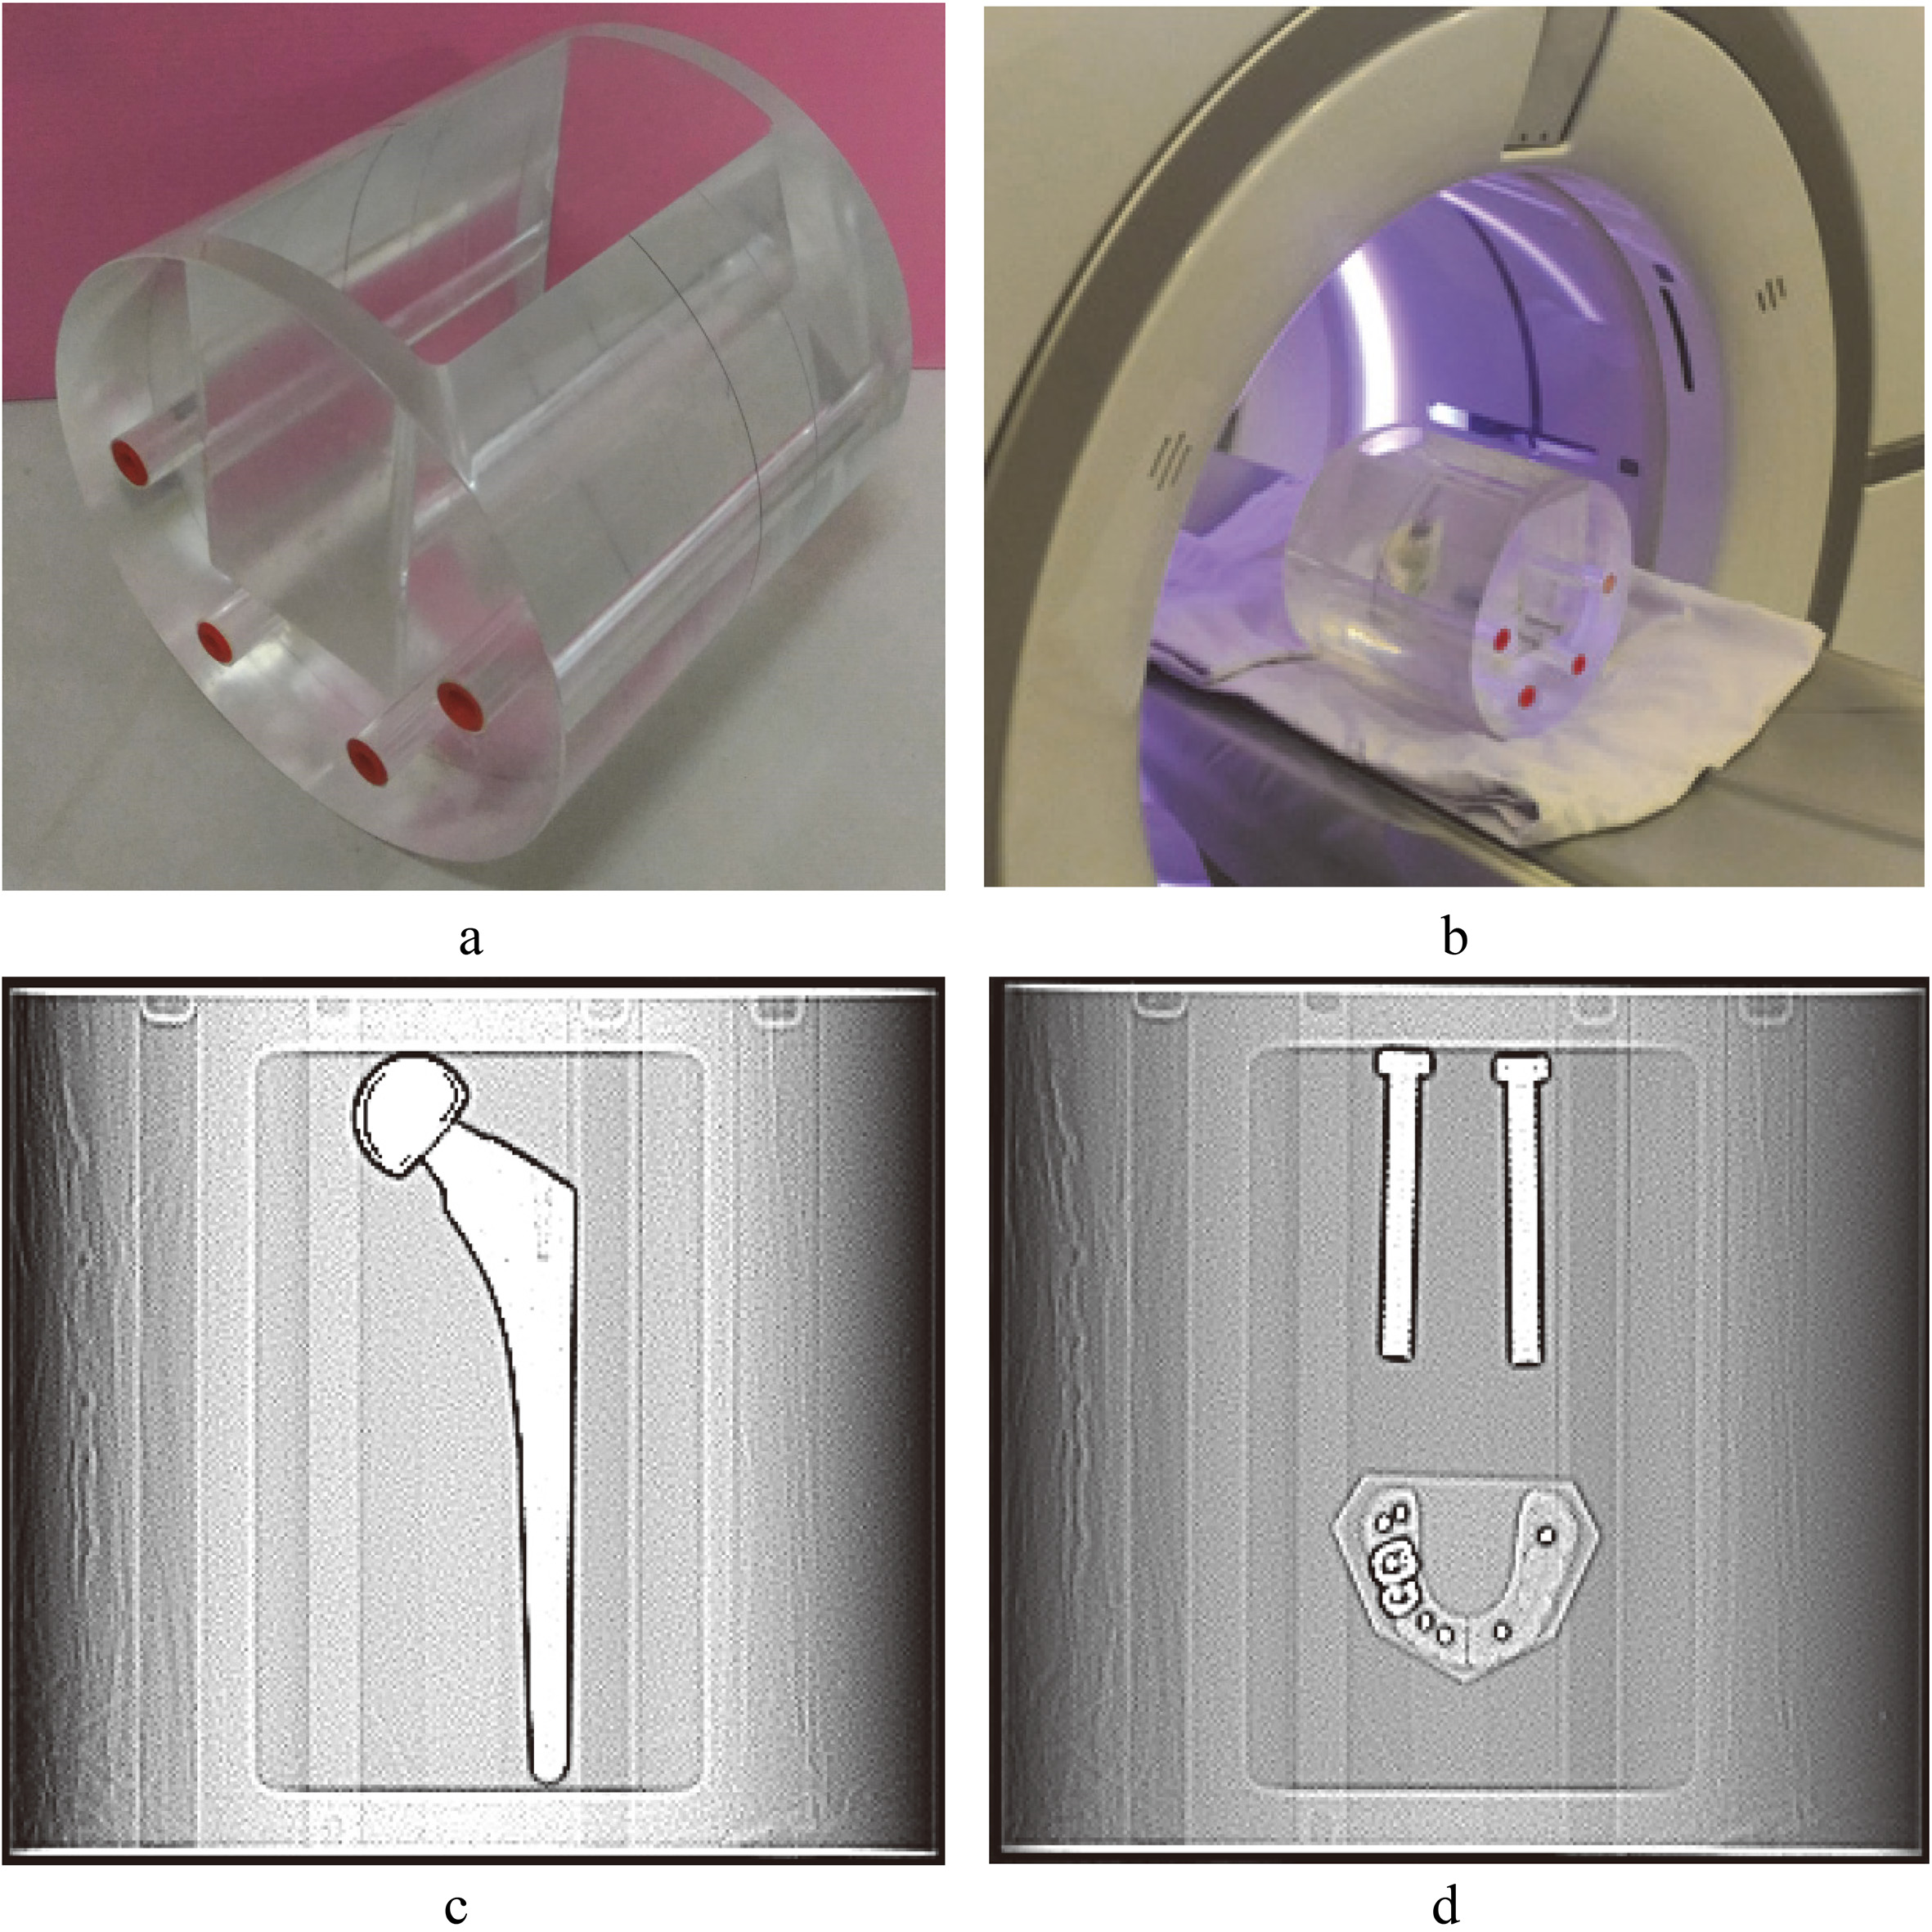 Customized acrylic phantom and scanned images. a. A cylindrical phantom with a rectangular groove in the side of the phantom. b. The phantom with metal implant is placed on the platform of a CT scanner. c. Scout image of hip implant. d. Scout image of spinal implant and dental filling.